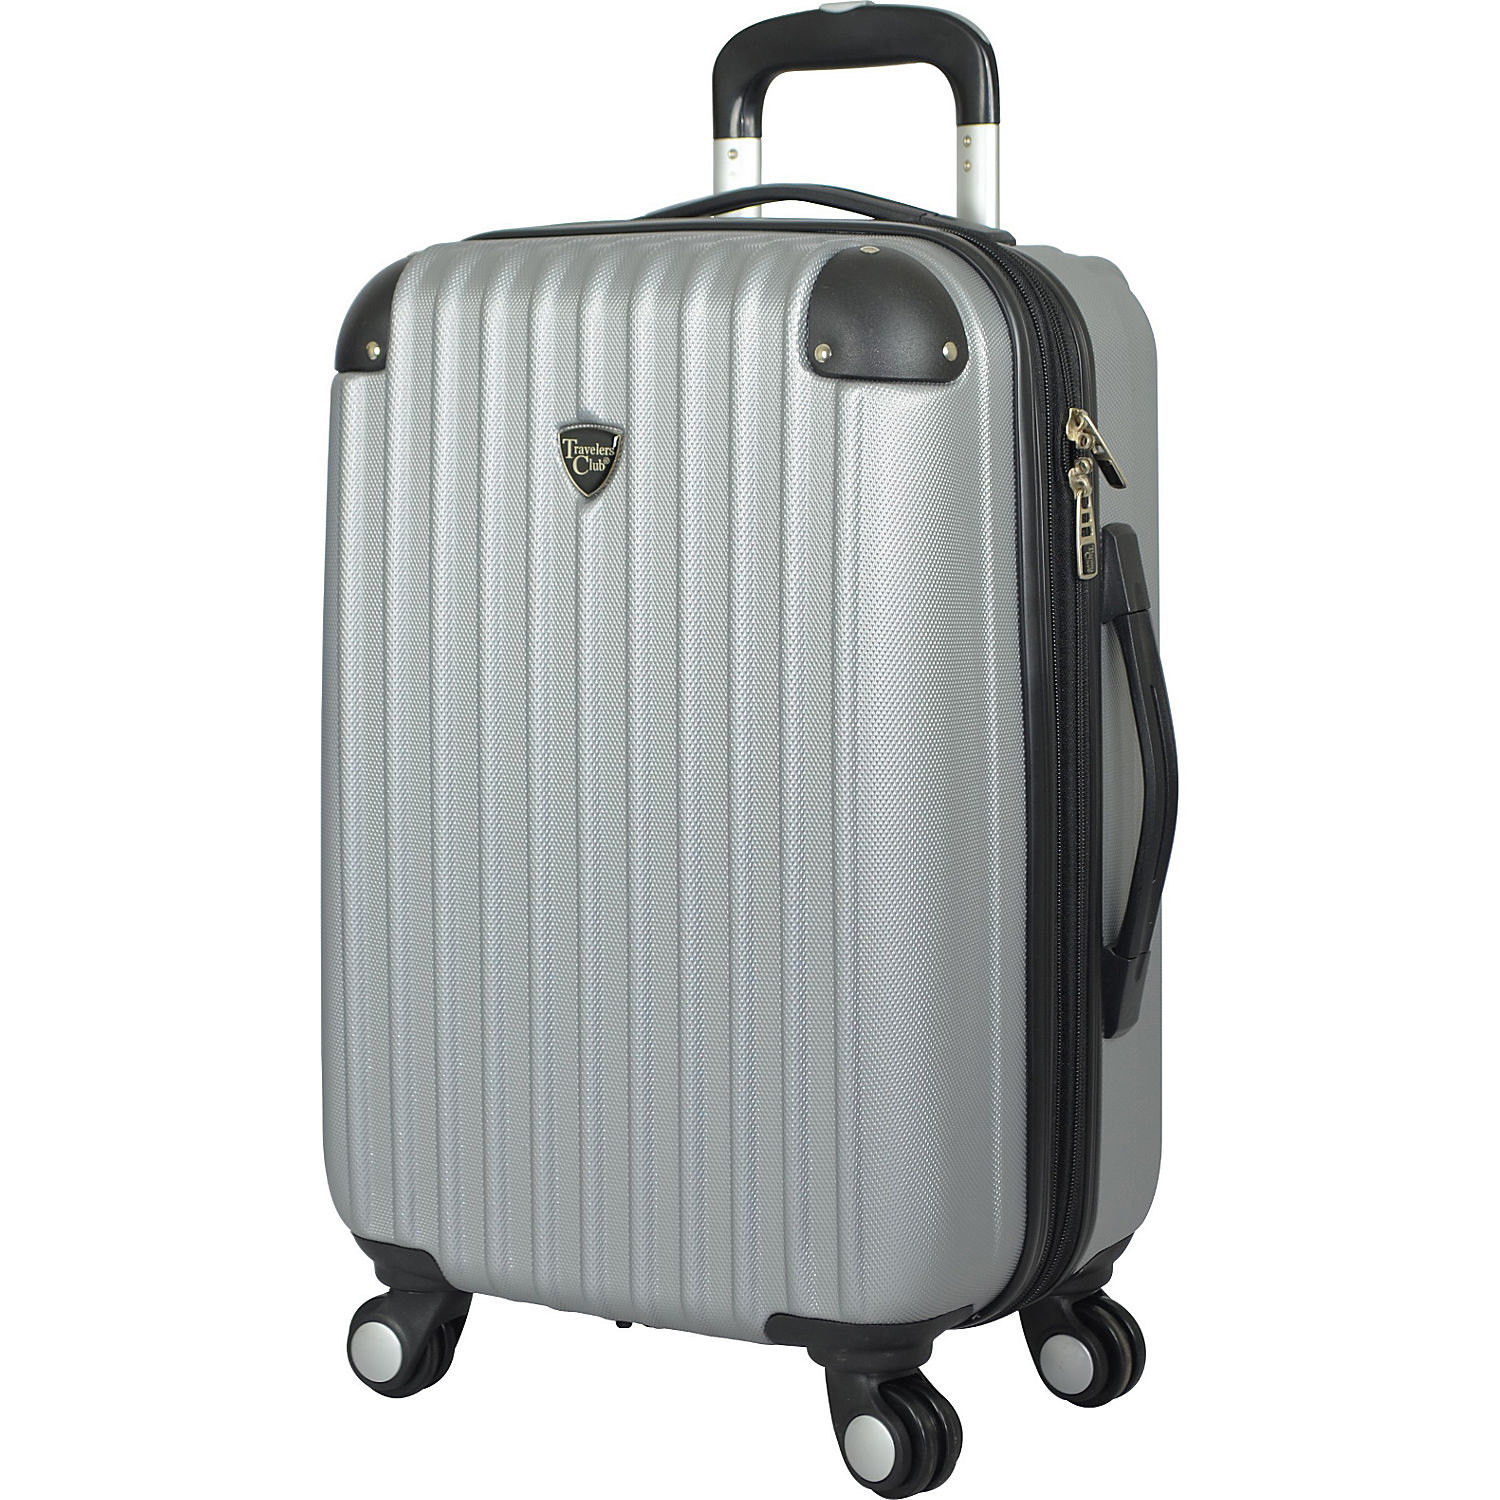 Carry on requirements for air travel, travelers club 20 carry on spinner luggage uk